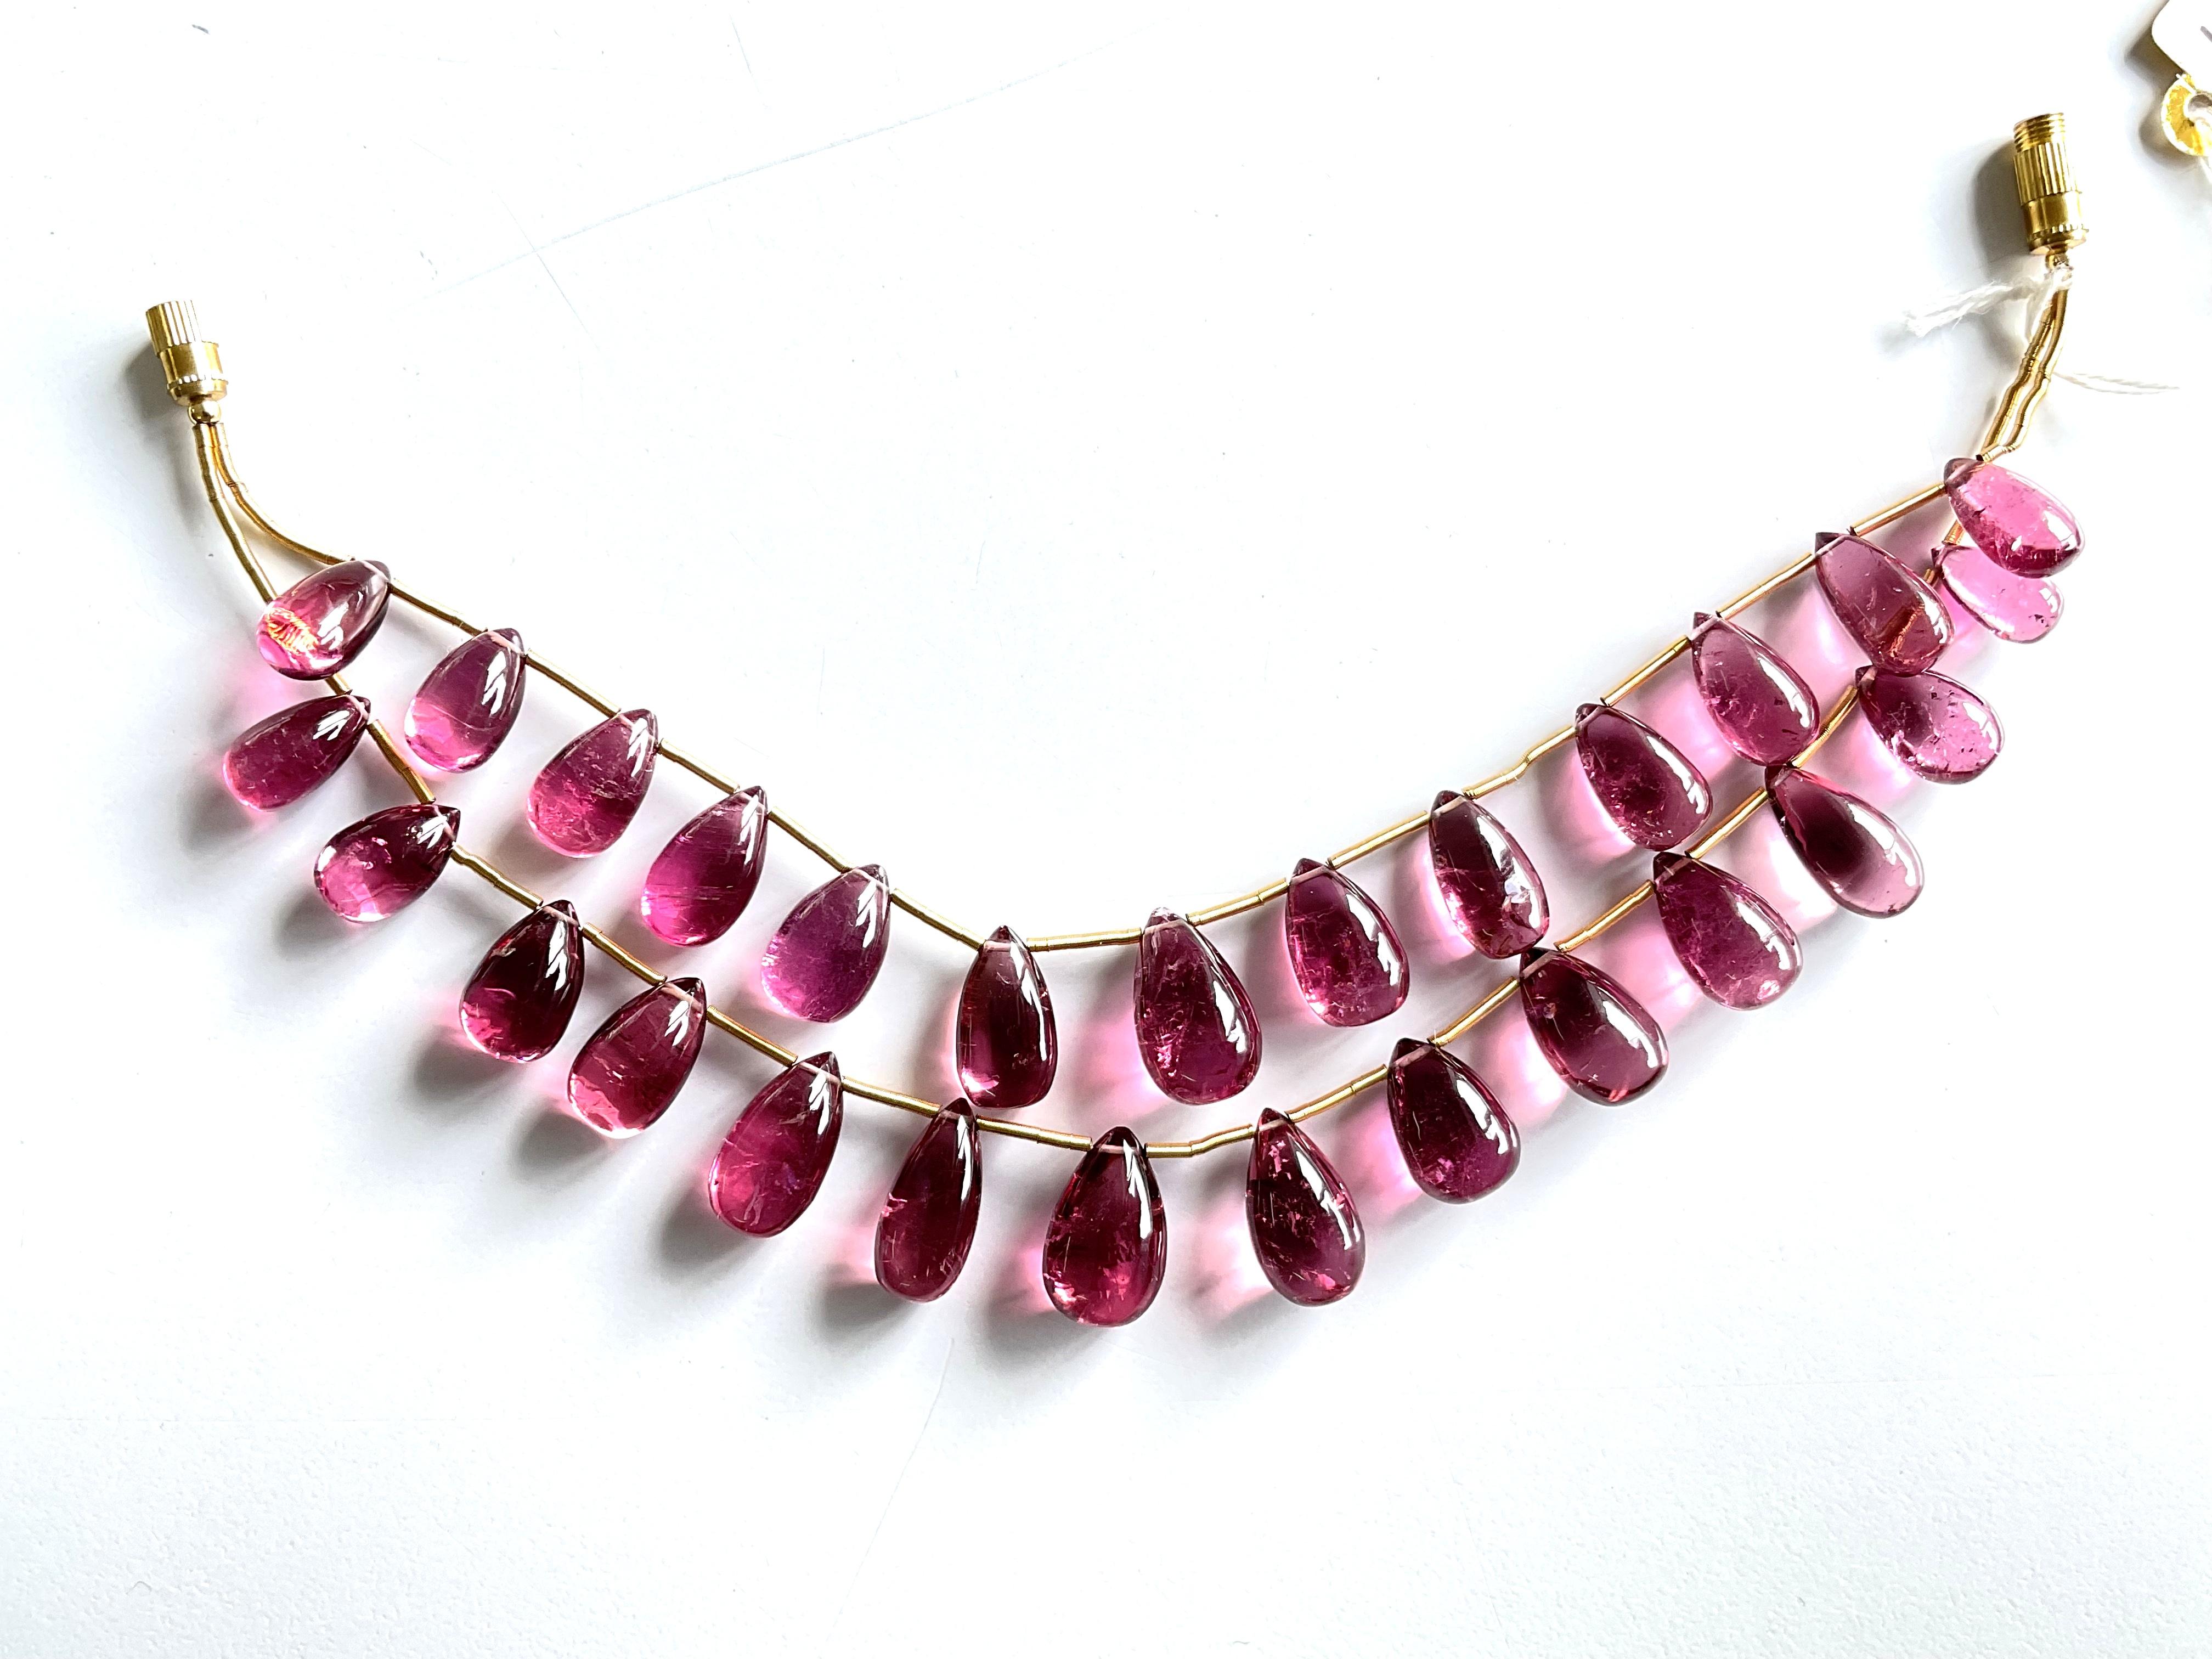 125.16 carats Rubellite Tourmaline Drops Layout Fine Jewelry Natural Gems For Sale 2